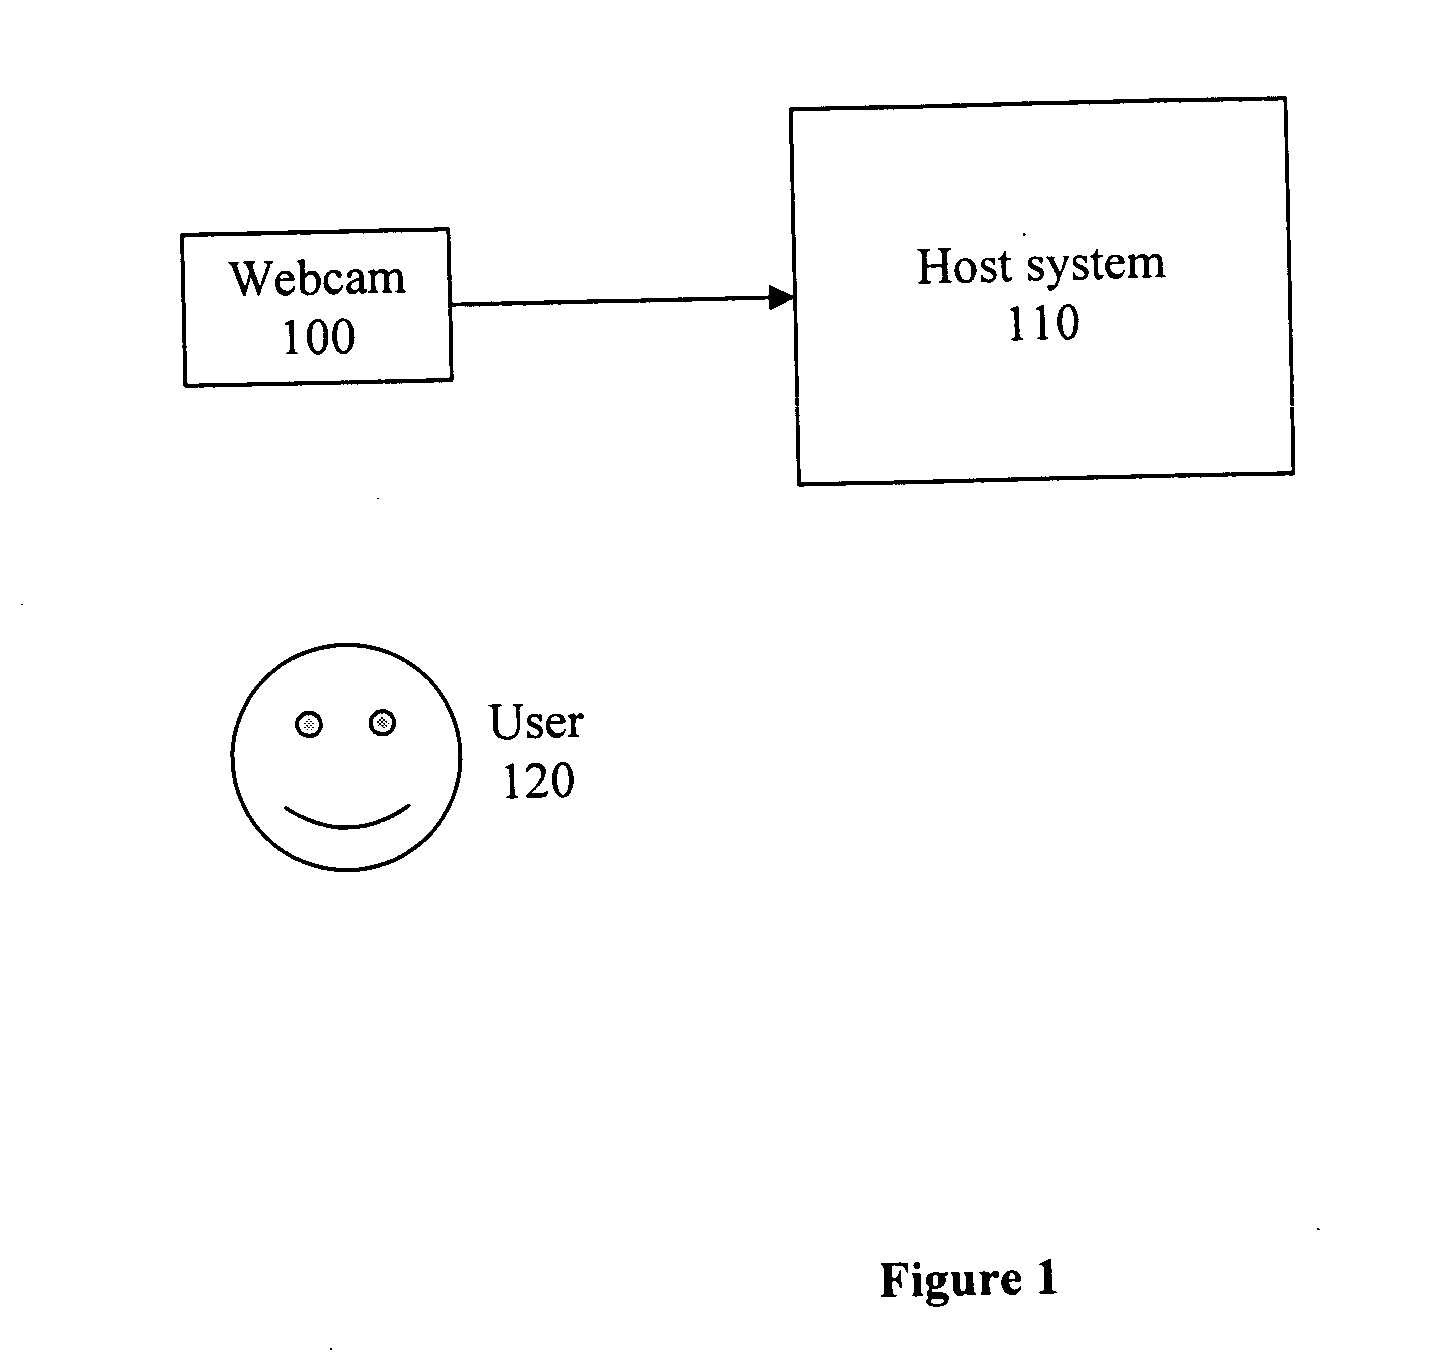 Method and system for use of 3D sensors in an image capture device